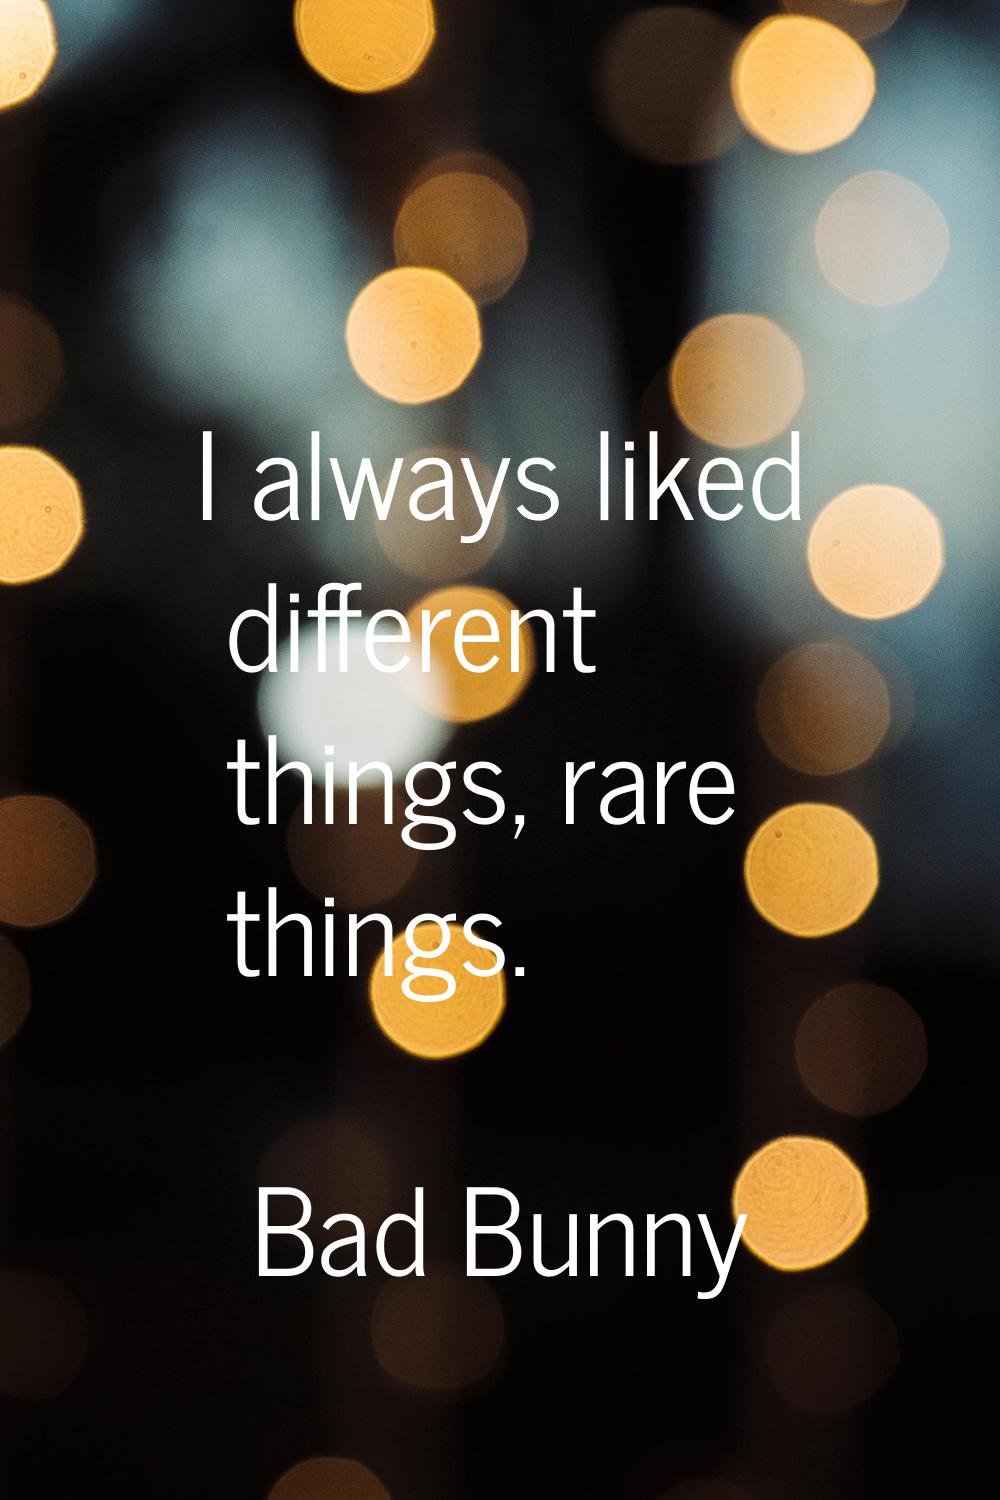 I always liked different things, rare things.